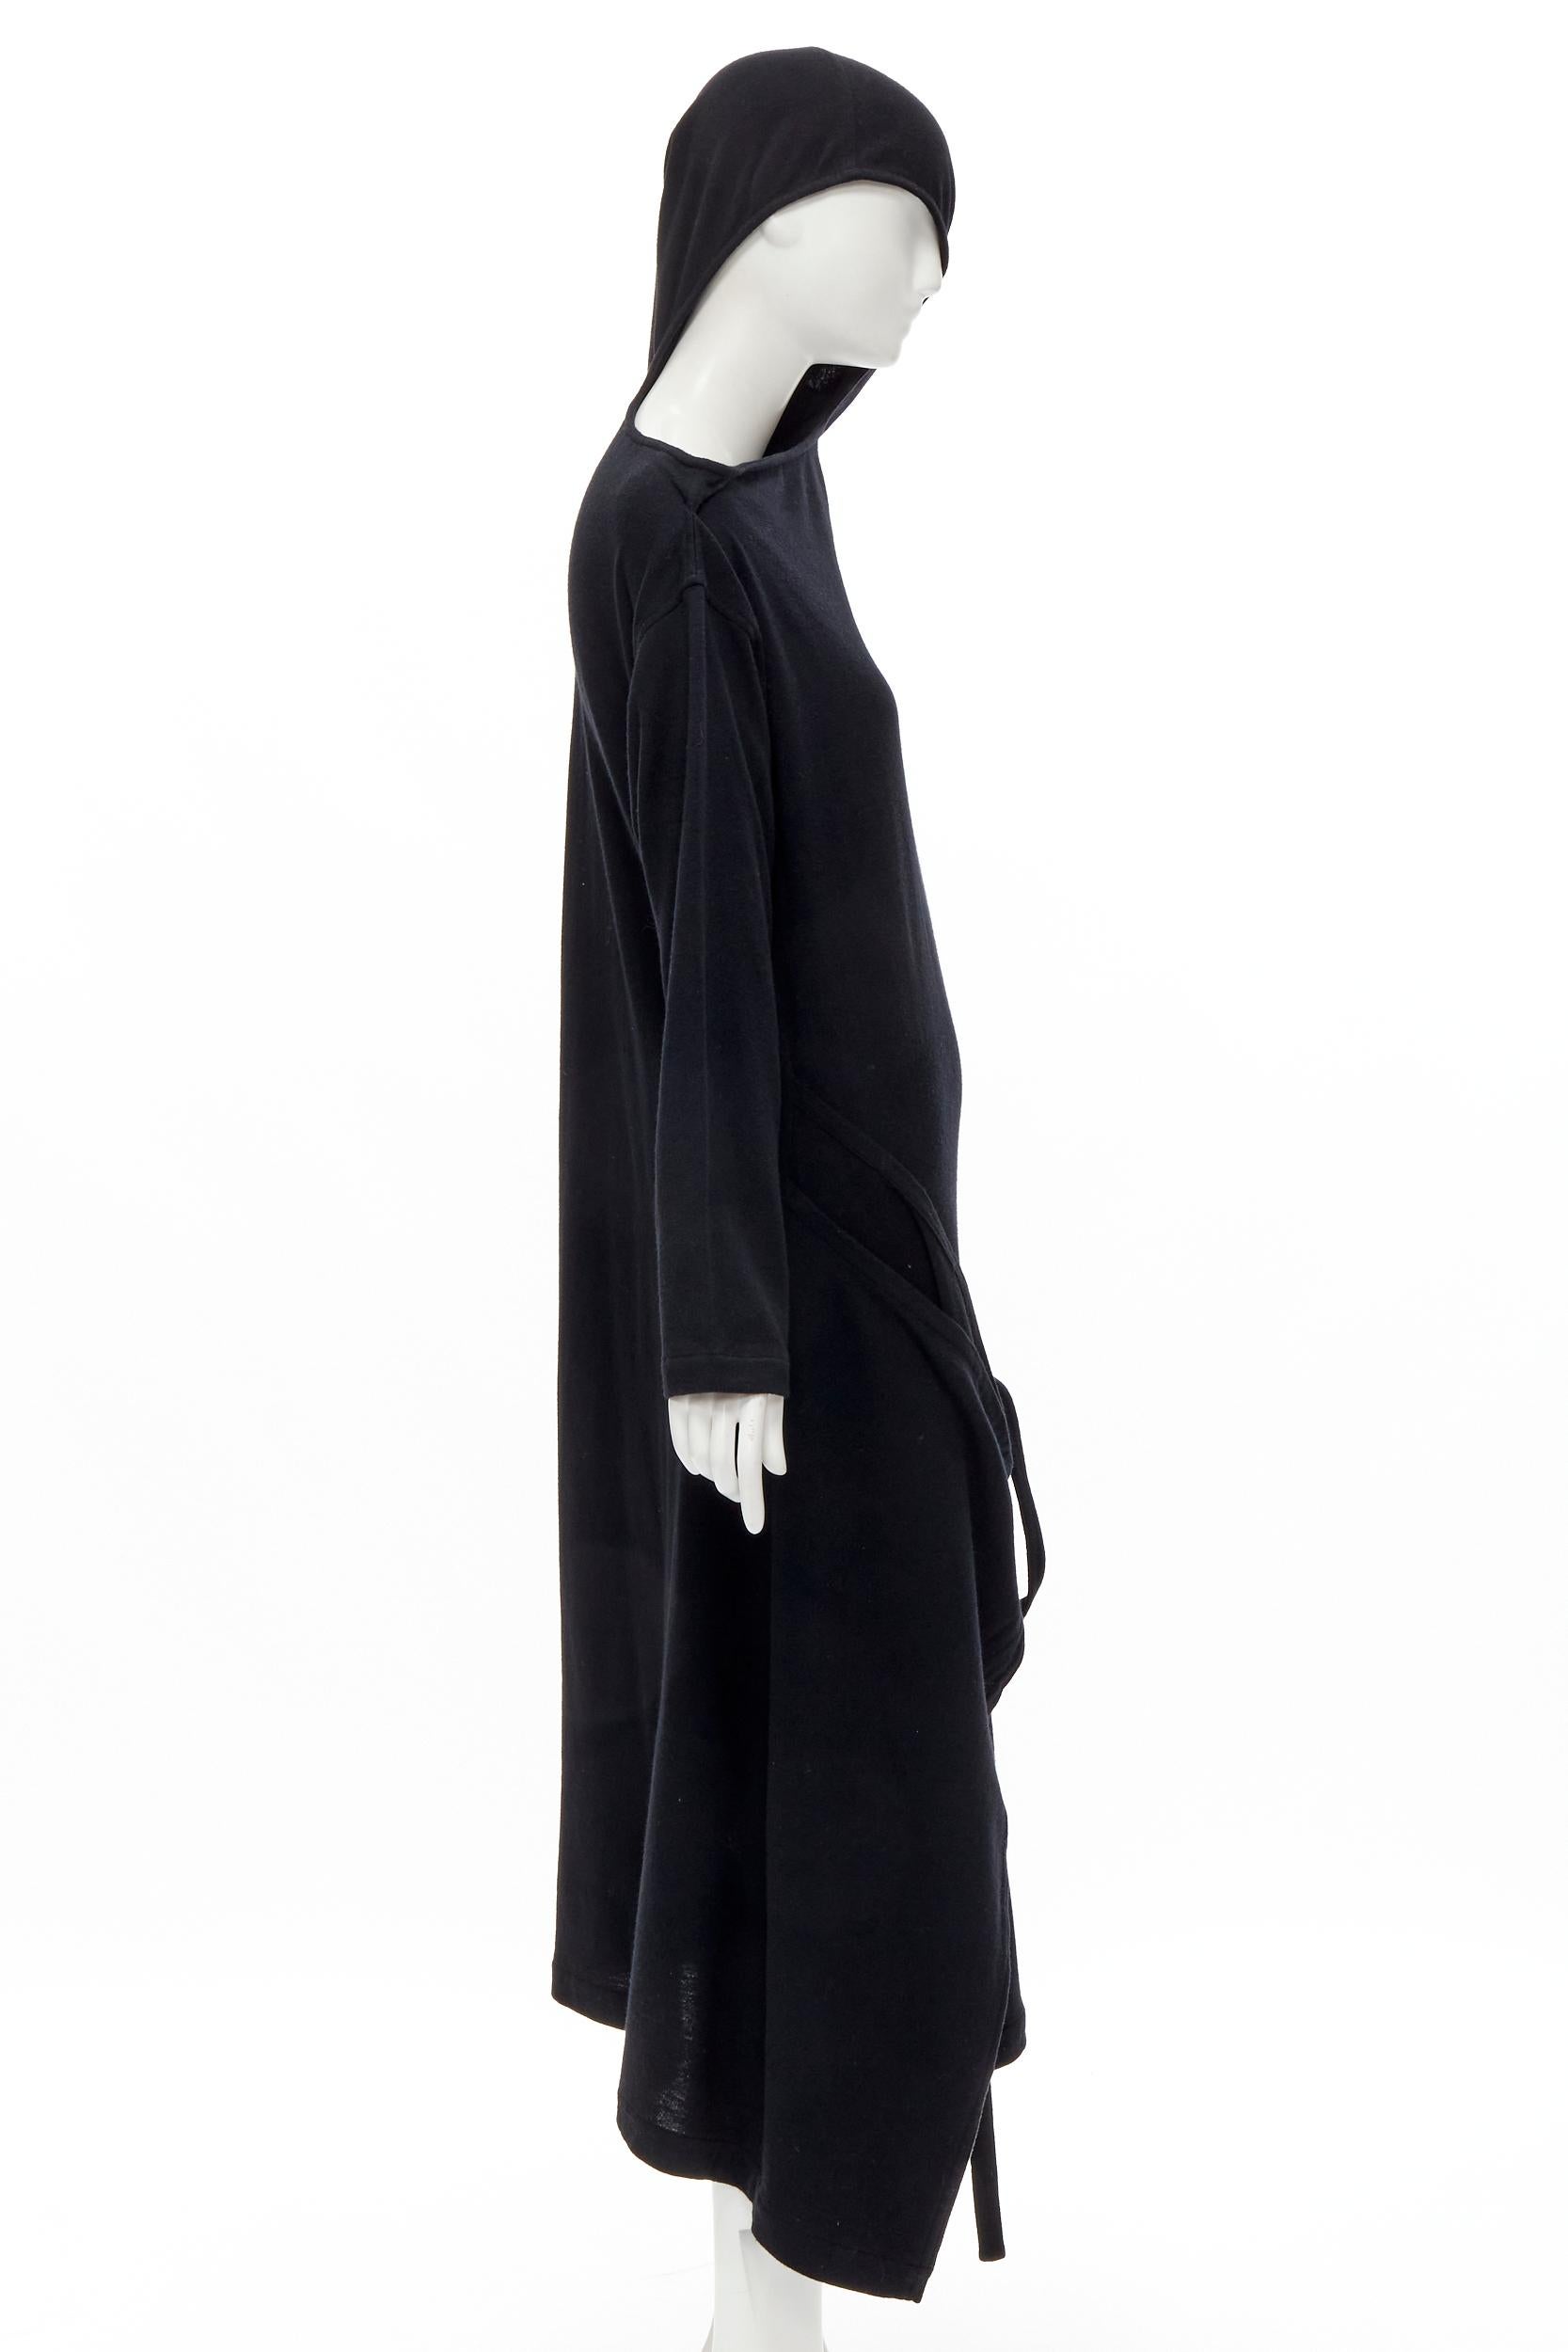 rare COMME DES GARCONS 1980's Vintage black asymmetric neckline hooded dress M In Excellent Condition For Sale In Hong Kong, NT